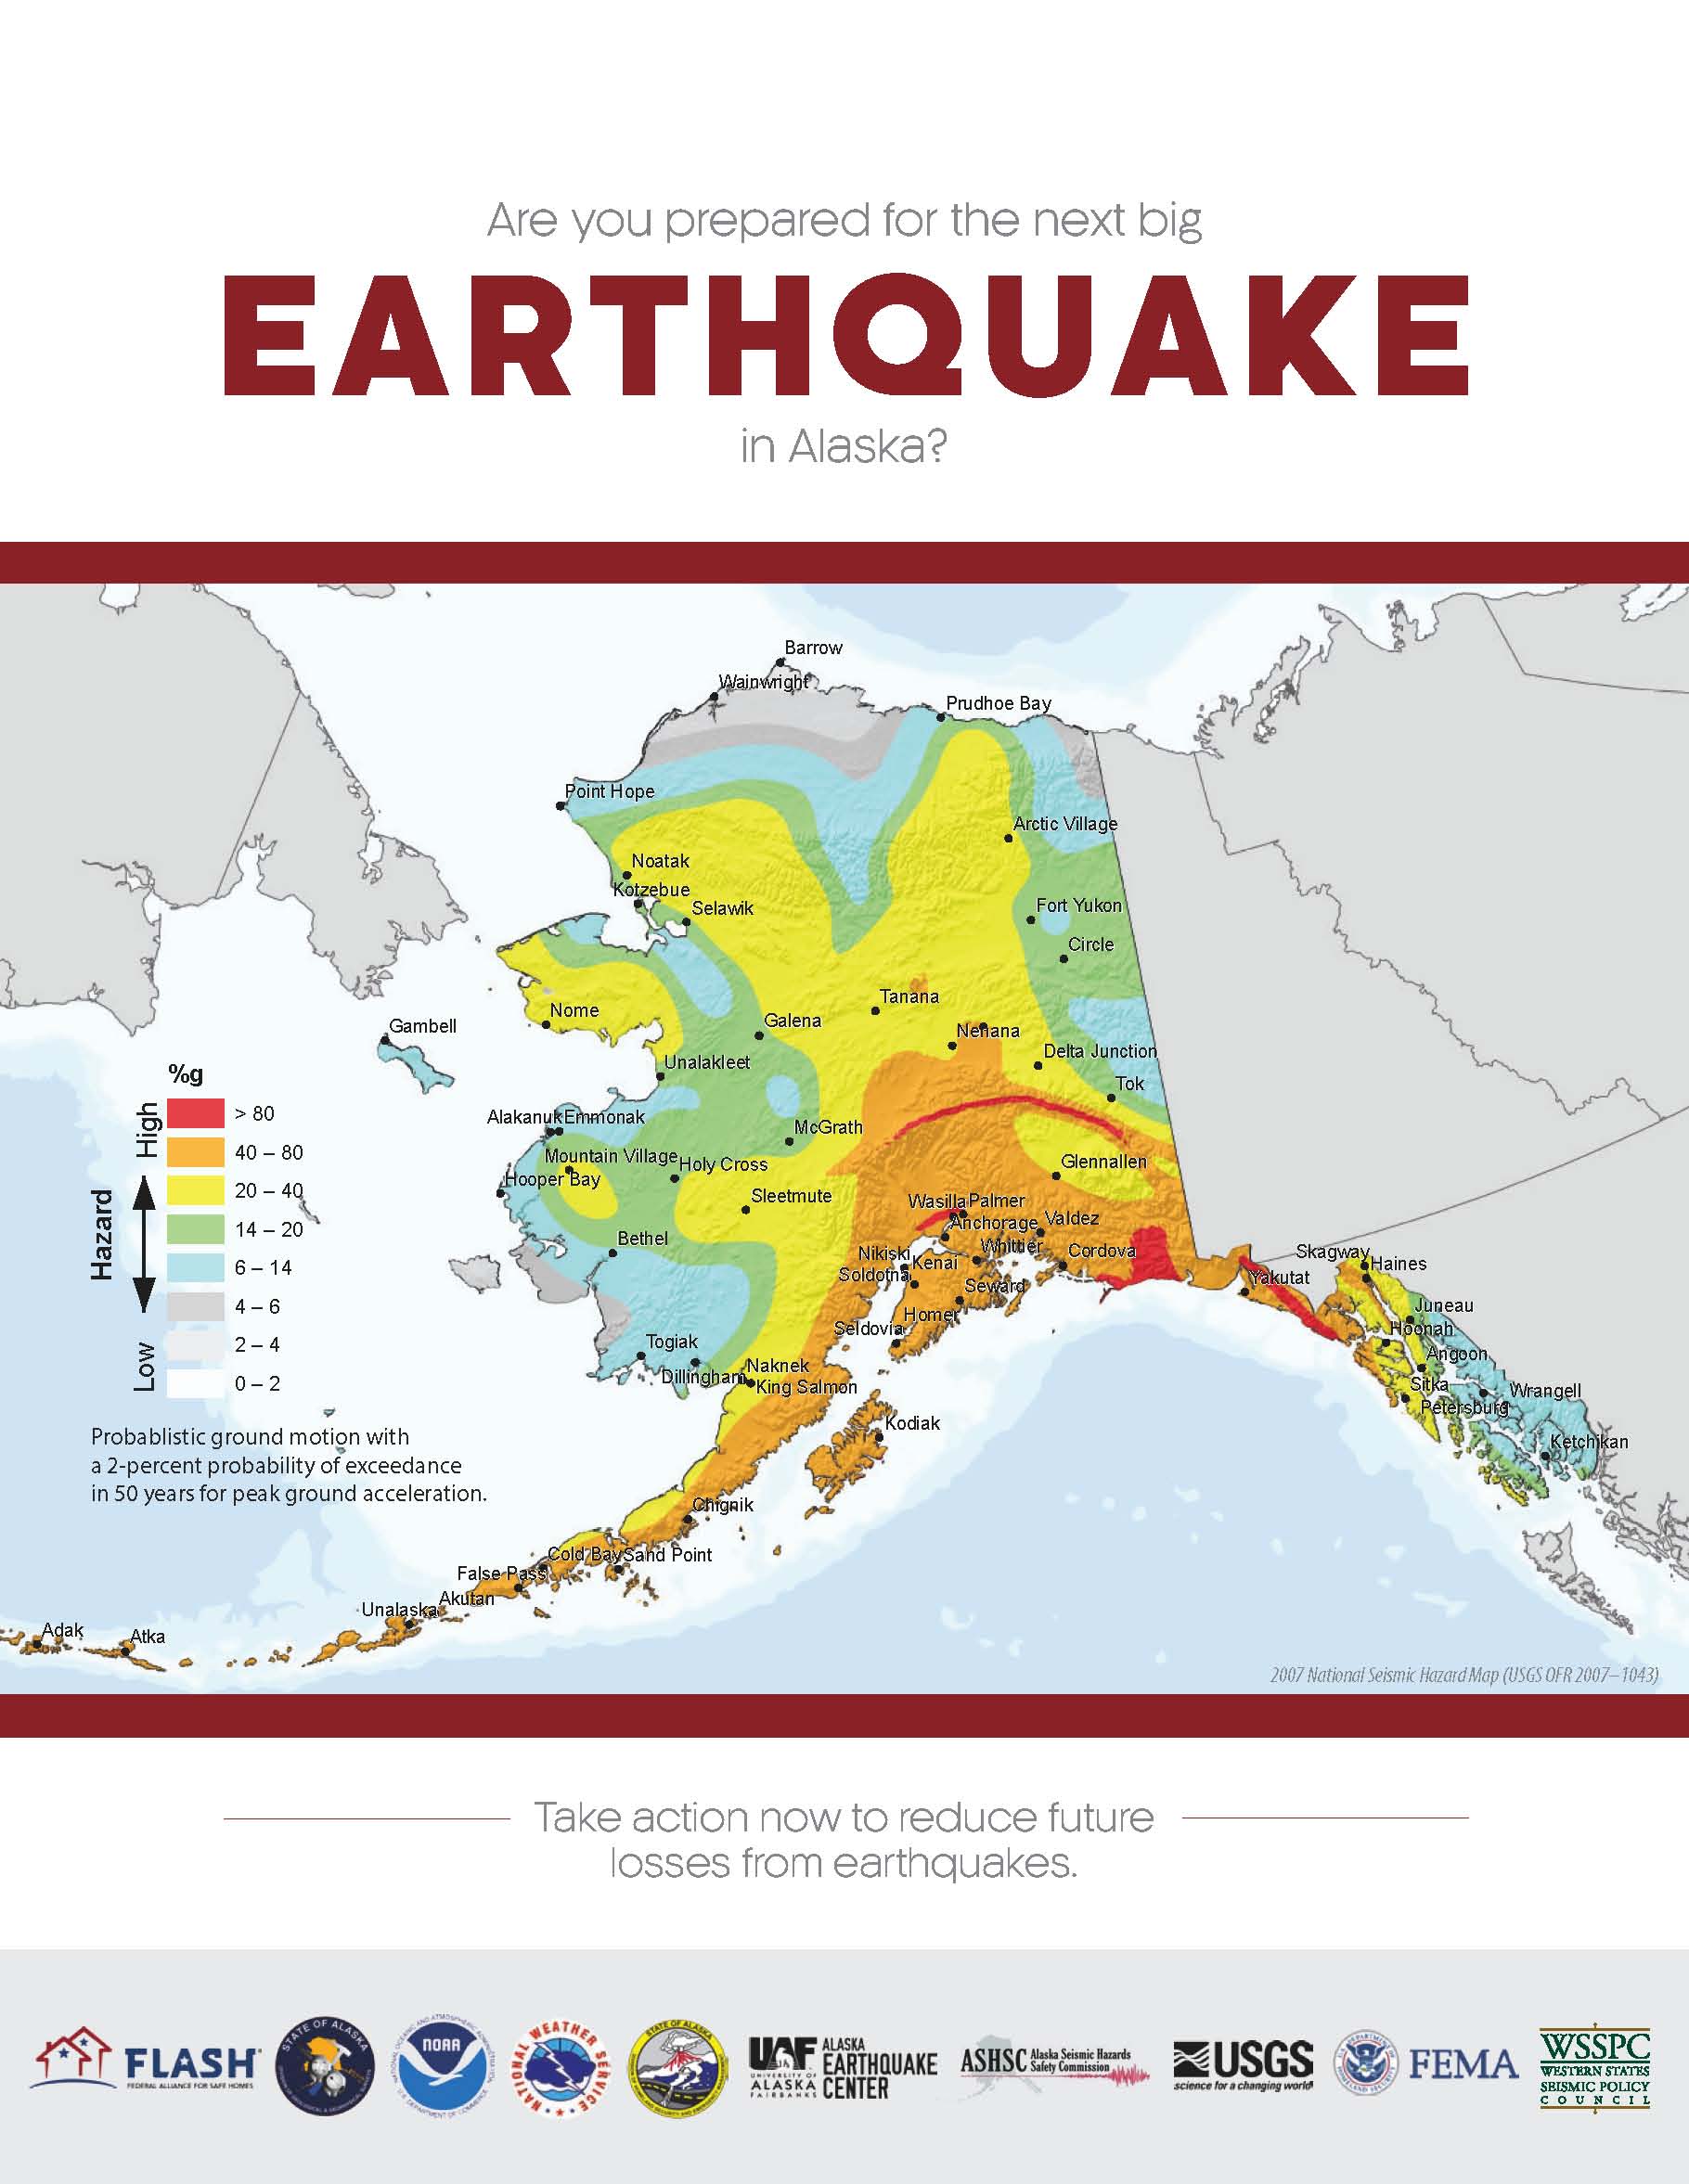 Cover of the updated "Are you prepared for the next big earthquake in Alaska?" pamplet available here. 